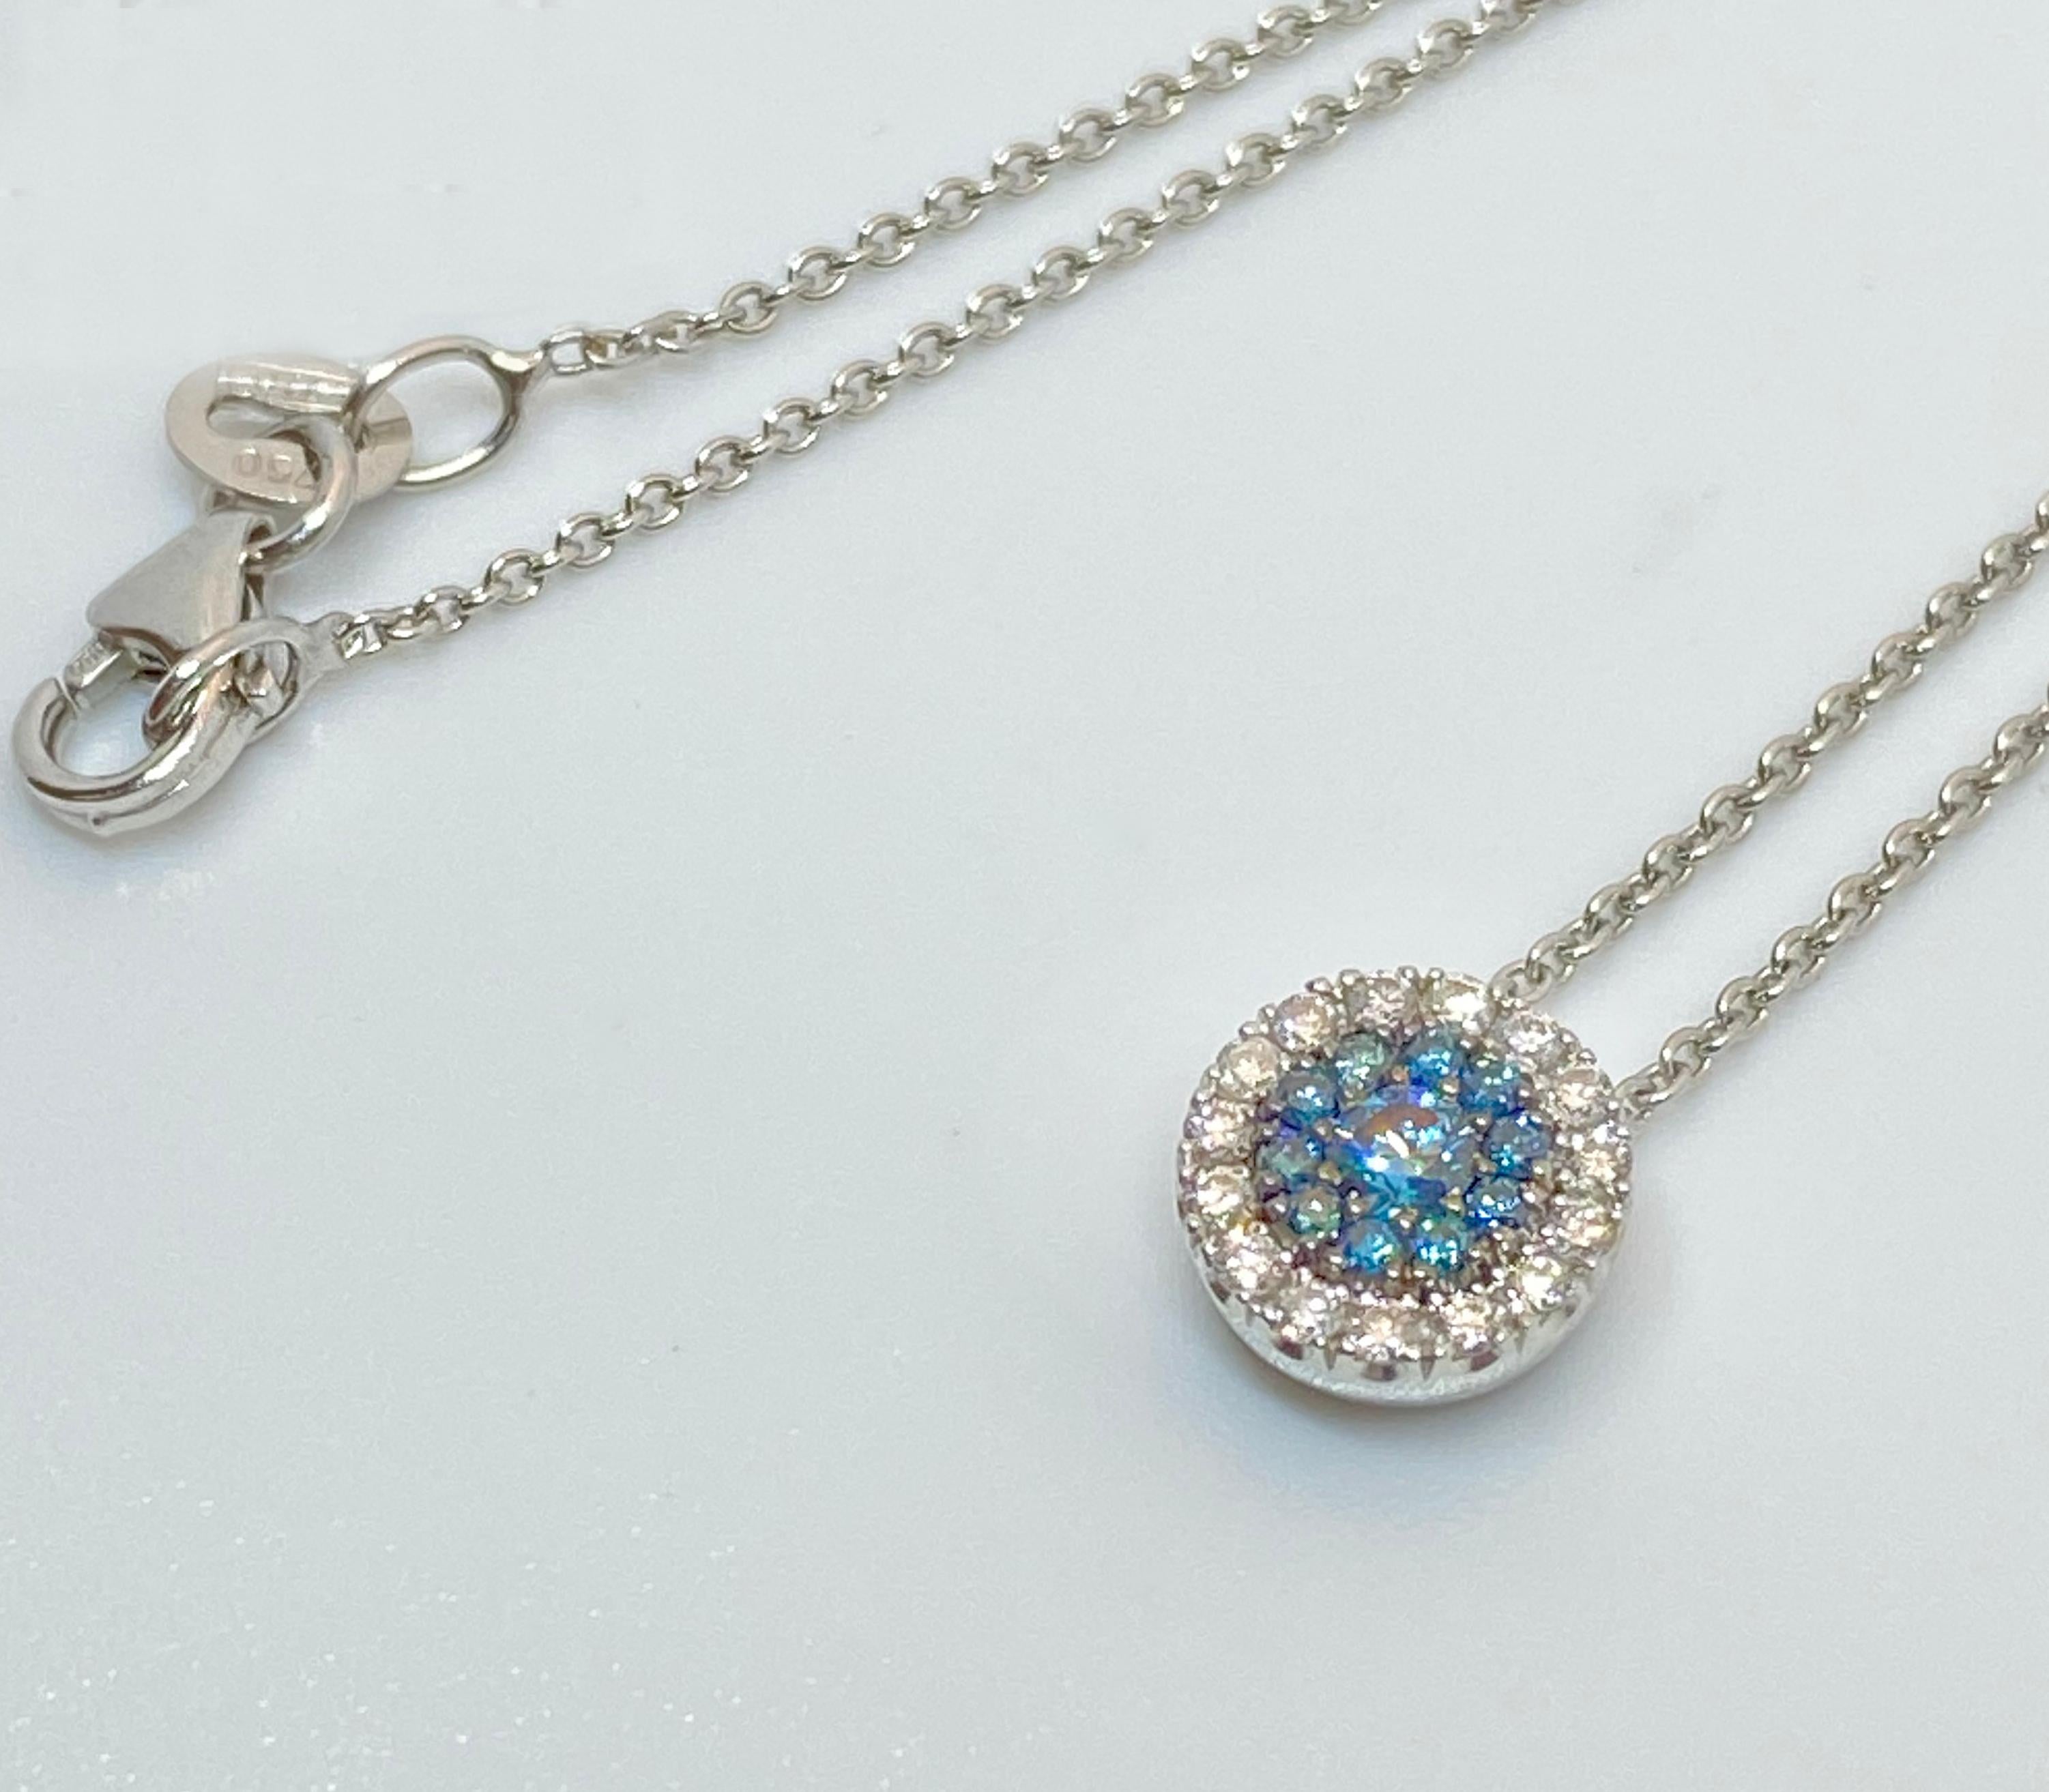 S.Georgios designer pendant Necklace is hand-made from 18 Karat White Gold to create a classic and elegant look. This beautiful Pendant Necklace feature a center brilliant-cut Blue Diamond with a total weight of 0.06 Carat, surrounded by 10 Blue